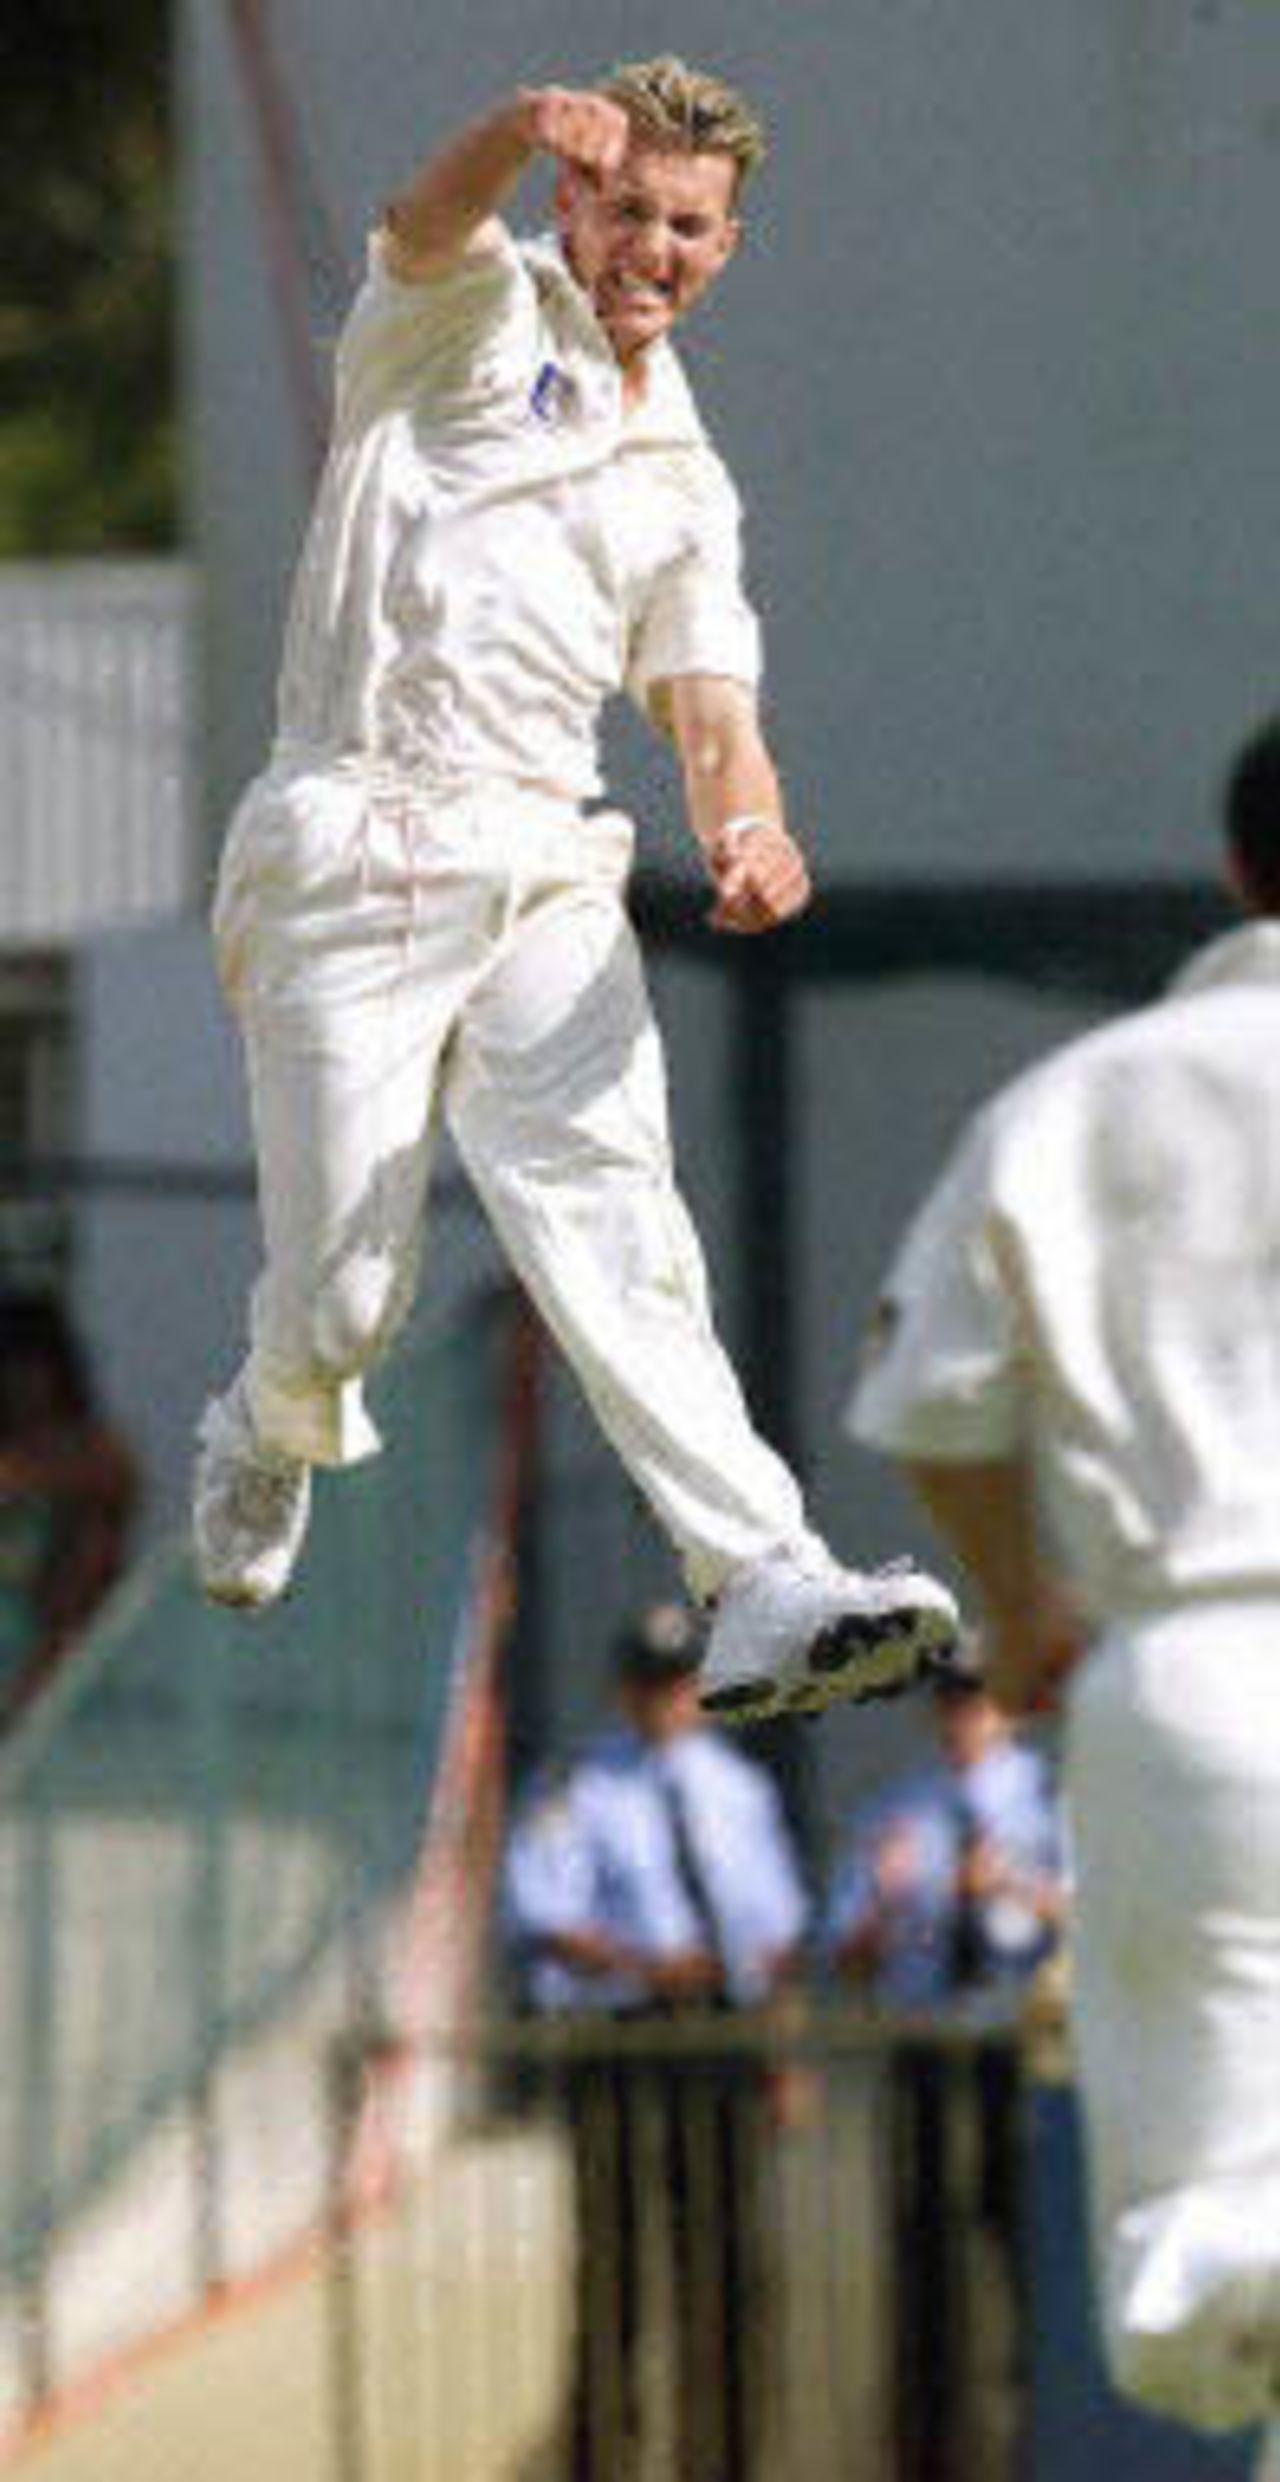 Brett Lee leaps high into the air after getting rid of Nixon McLean, The Frank Worrell Trophy, 2000/01, 2nd Test, Australia v West Indies, W.A.C.A. Ground, Perth, 01-05 December 2000 (Day 3).